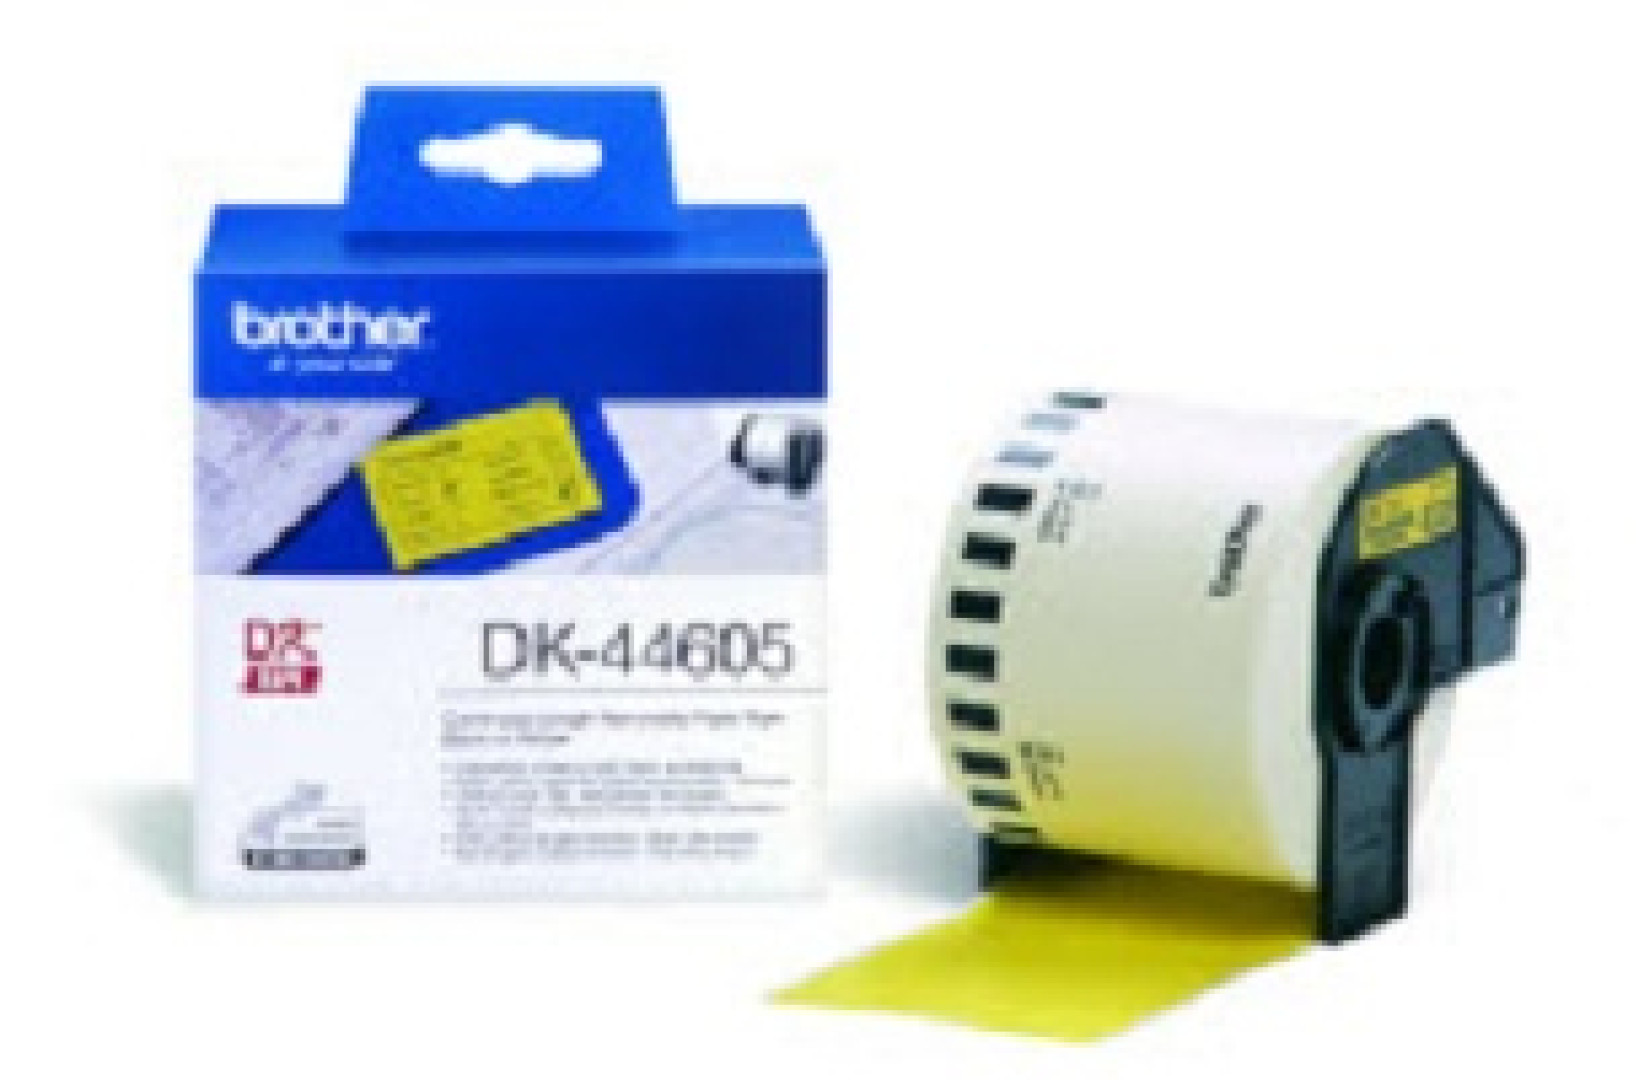 Brother DK-44605 Continuous Removable Yellow Paper Tape (62mm) Giallo